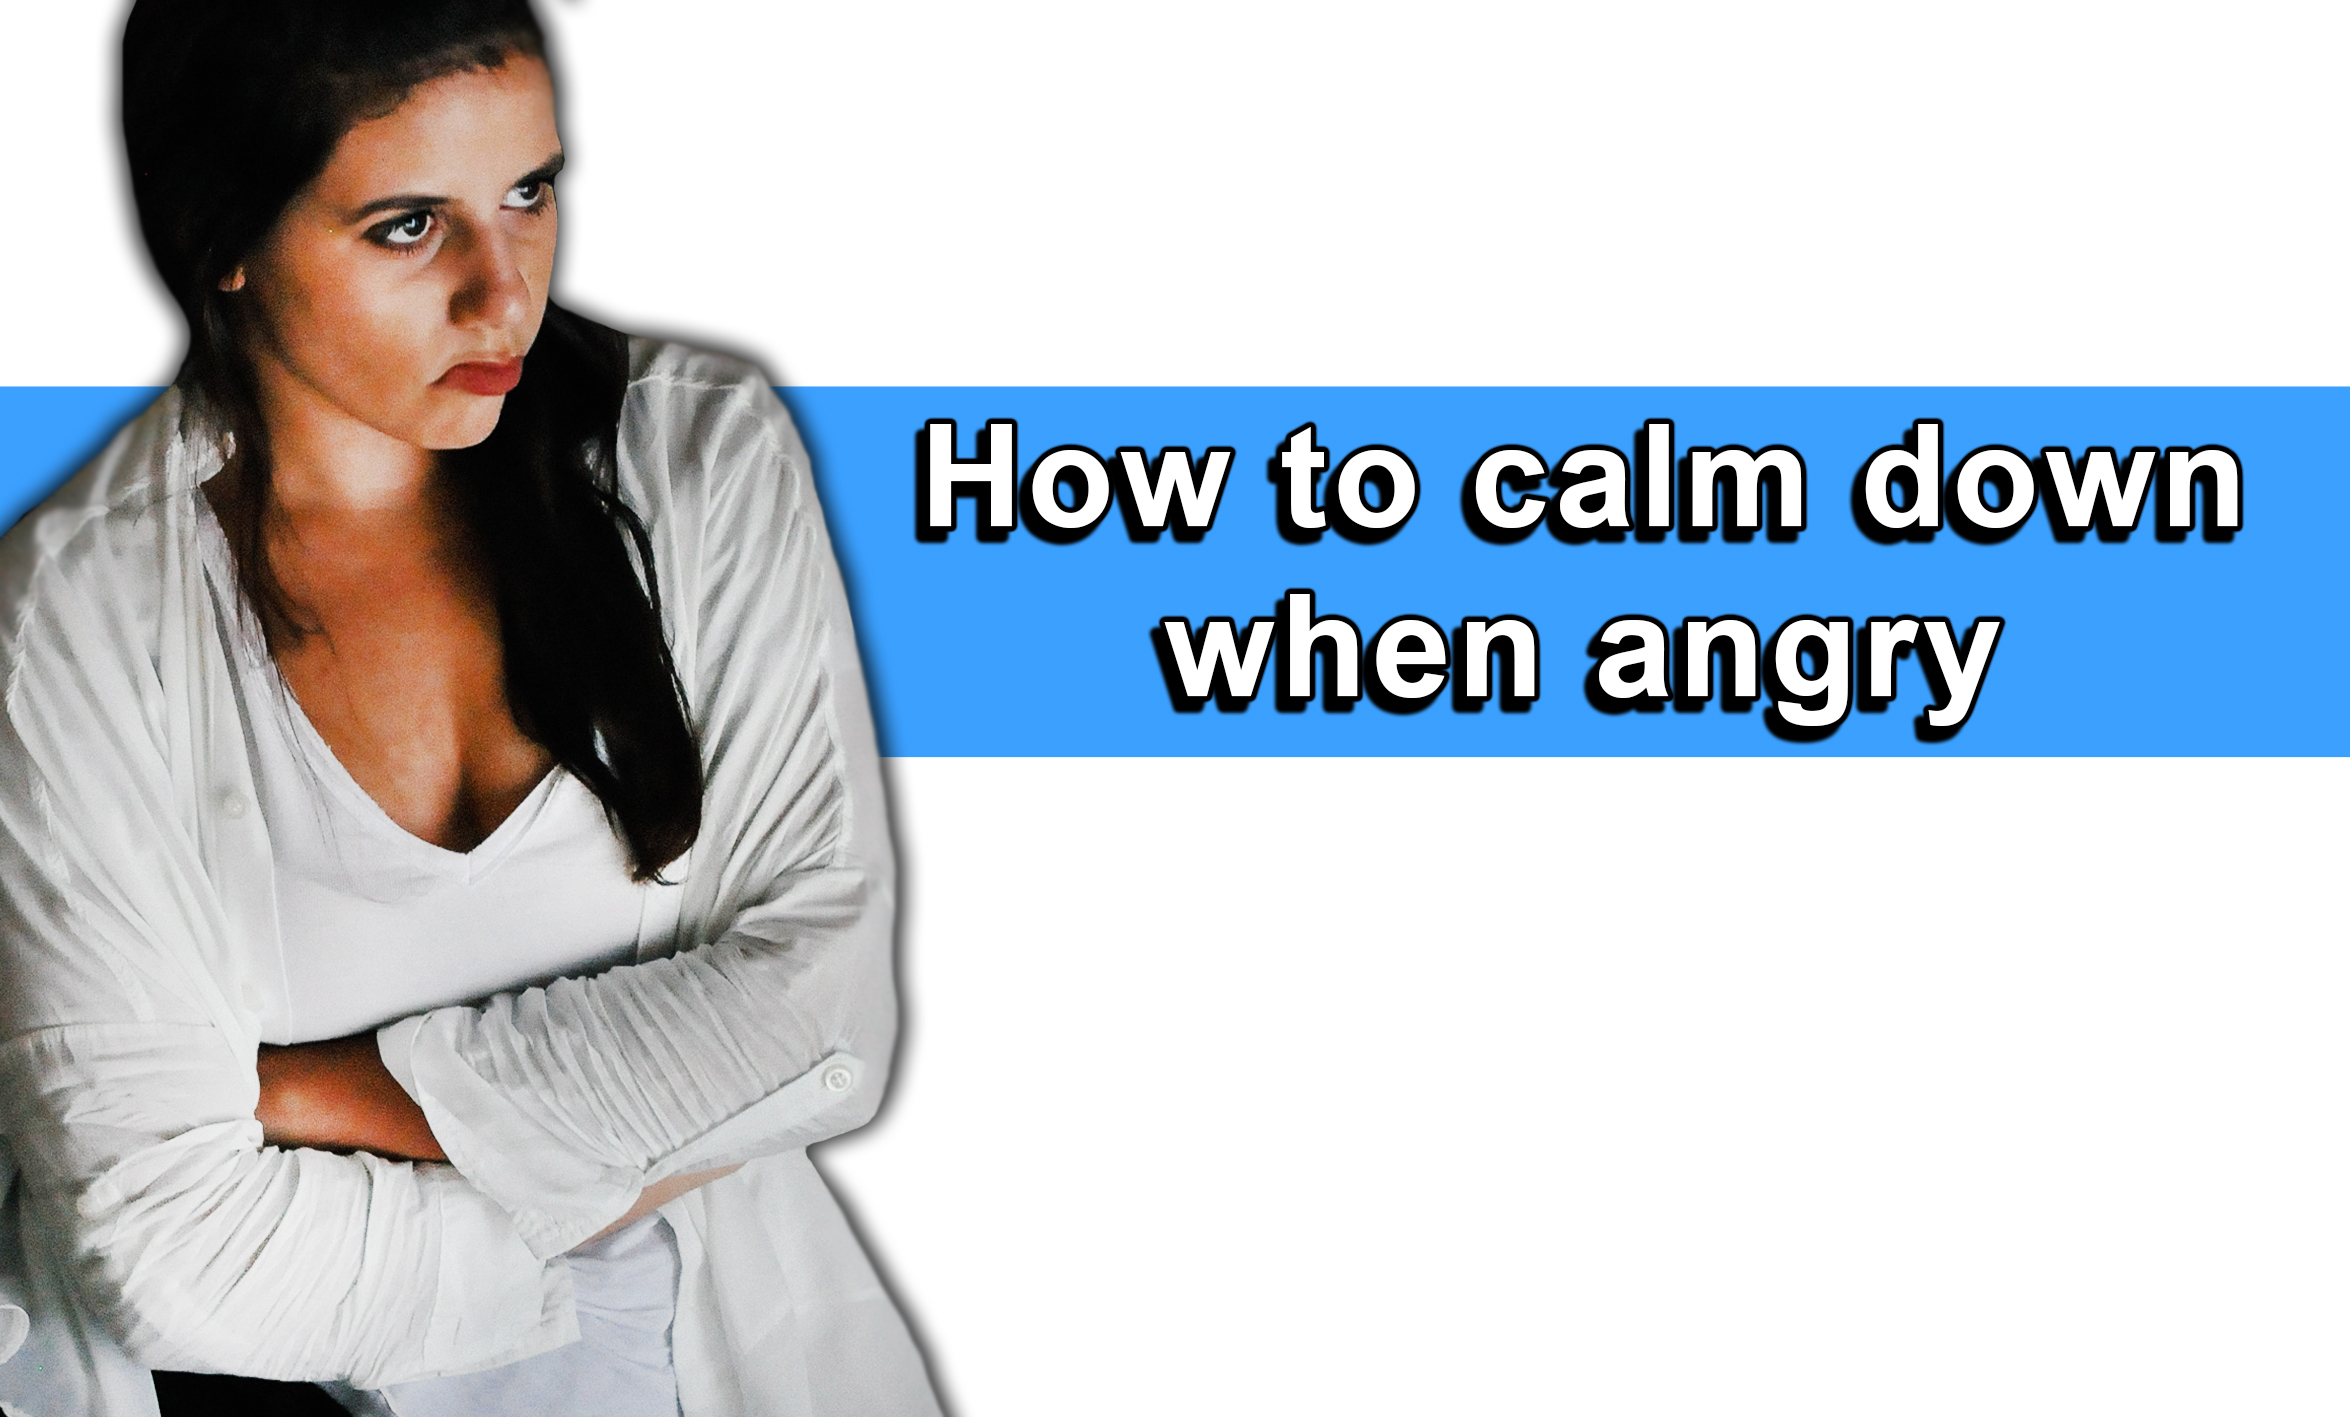 How to calm down when angry